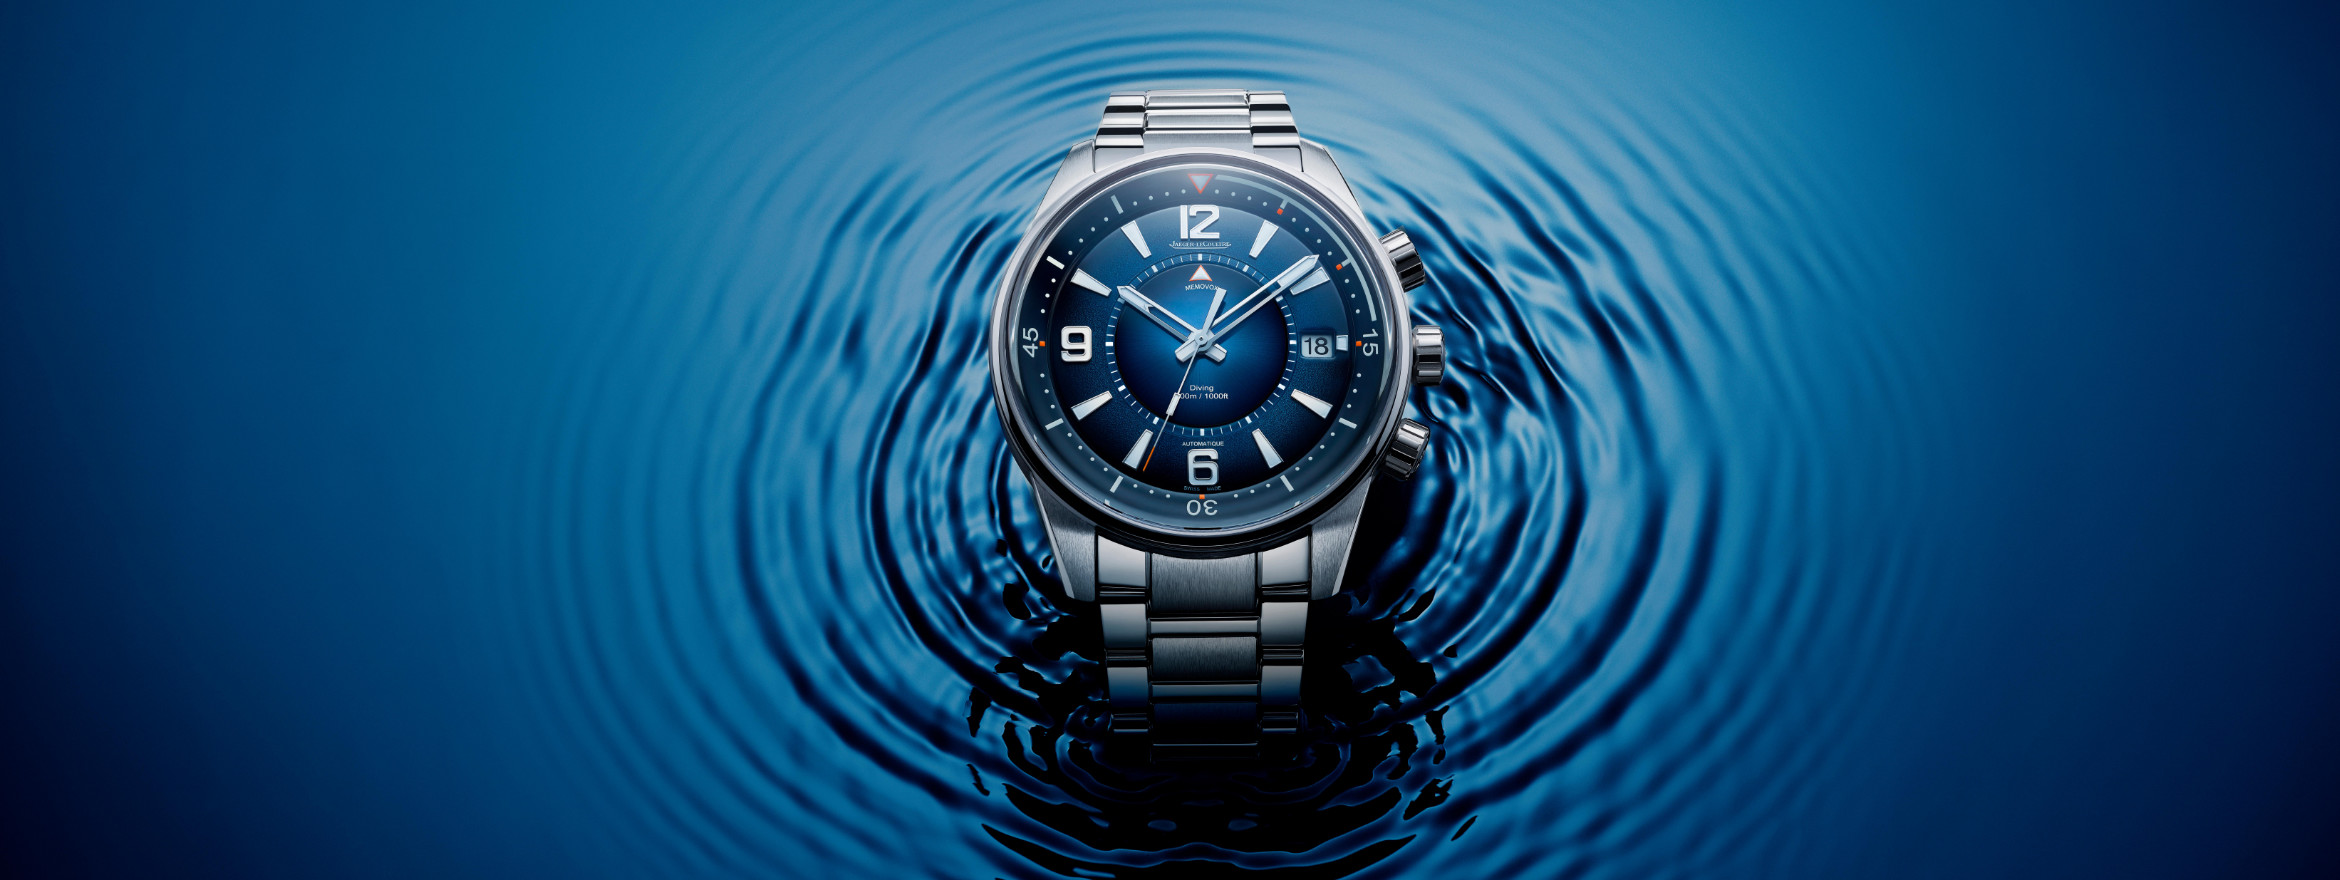 The Jaeger-LeCoultre Polaris Mariner Collection